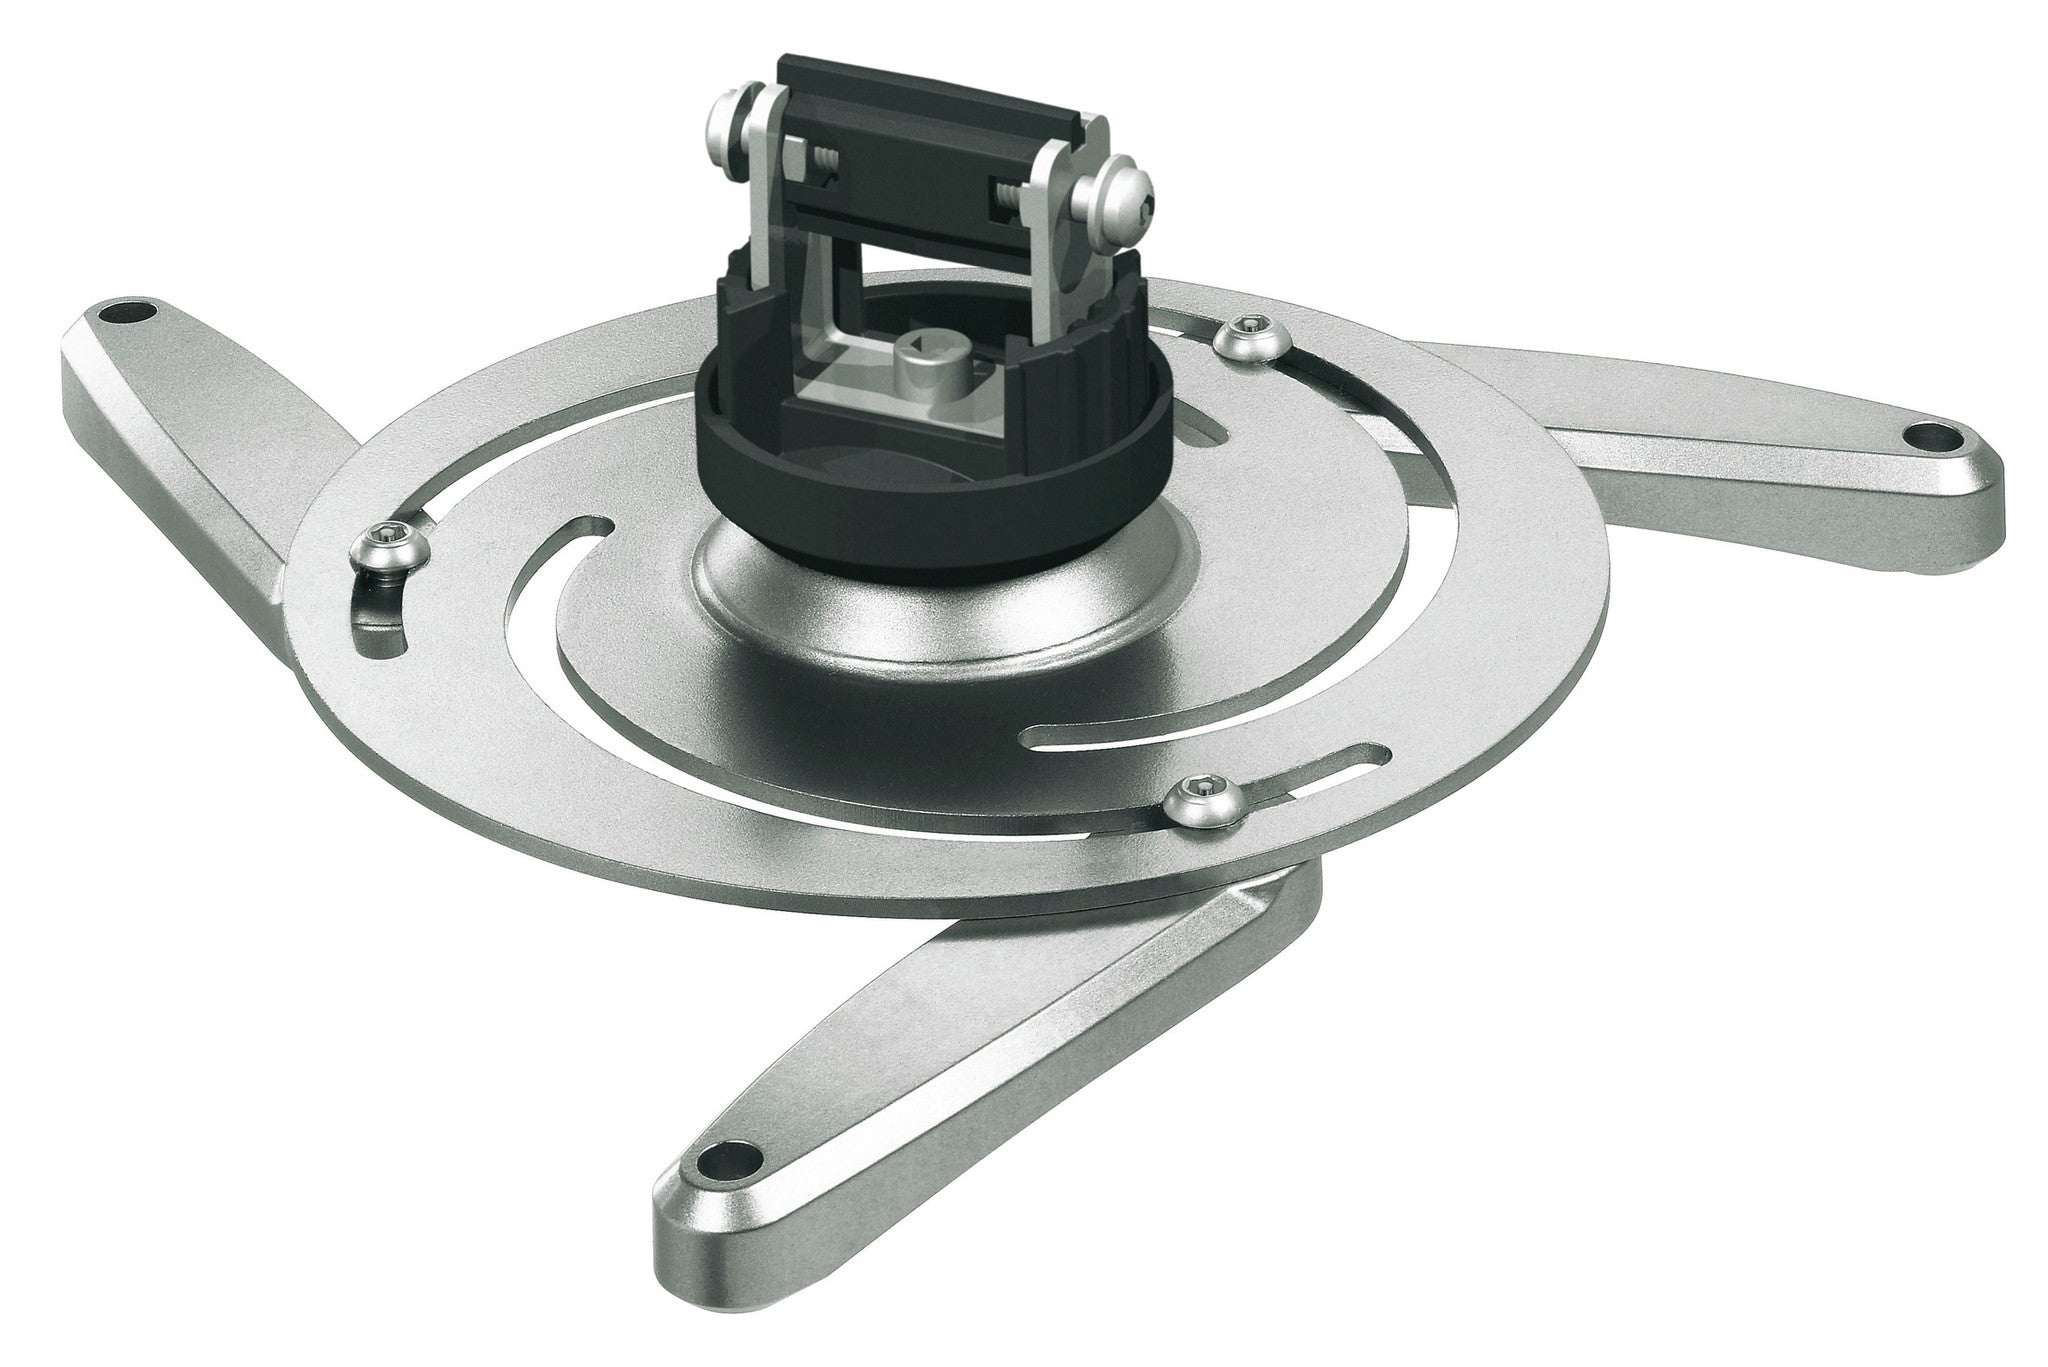 Vogel's VPC 545 Close Coupled Ceiling Mount for Projector